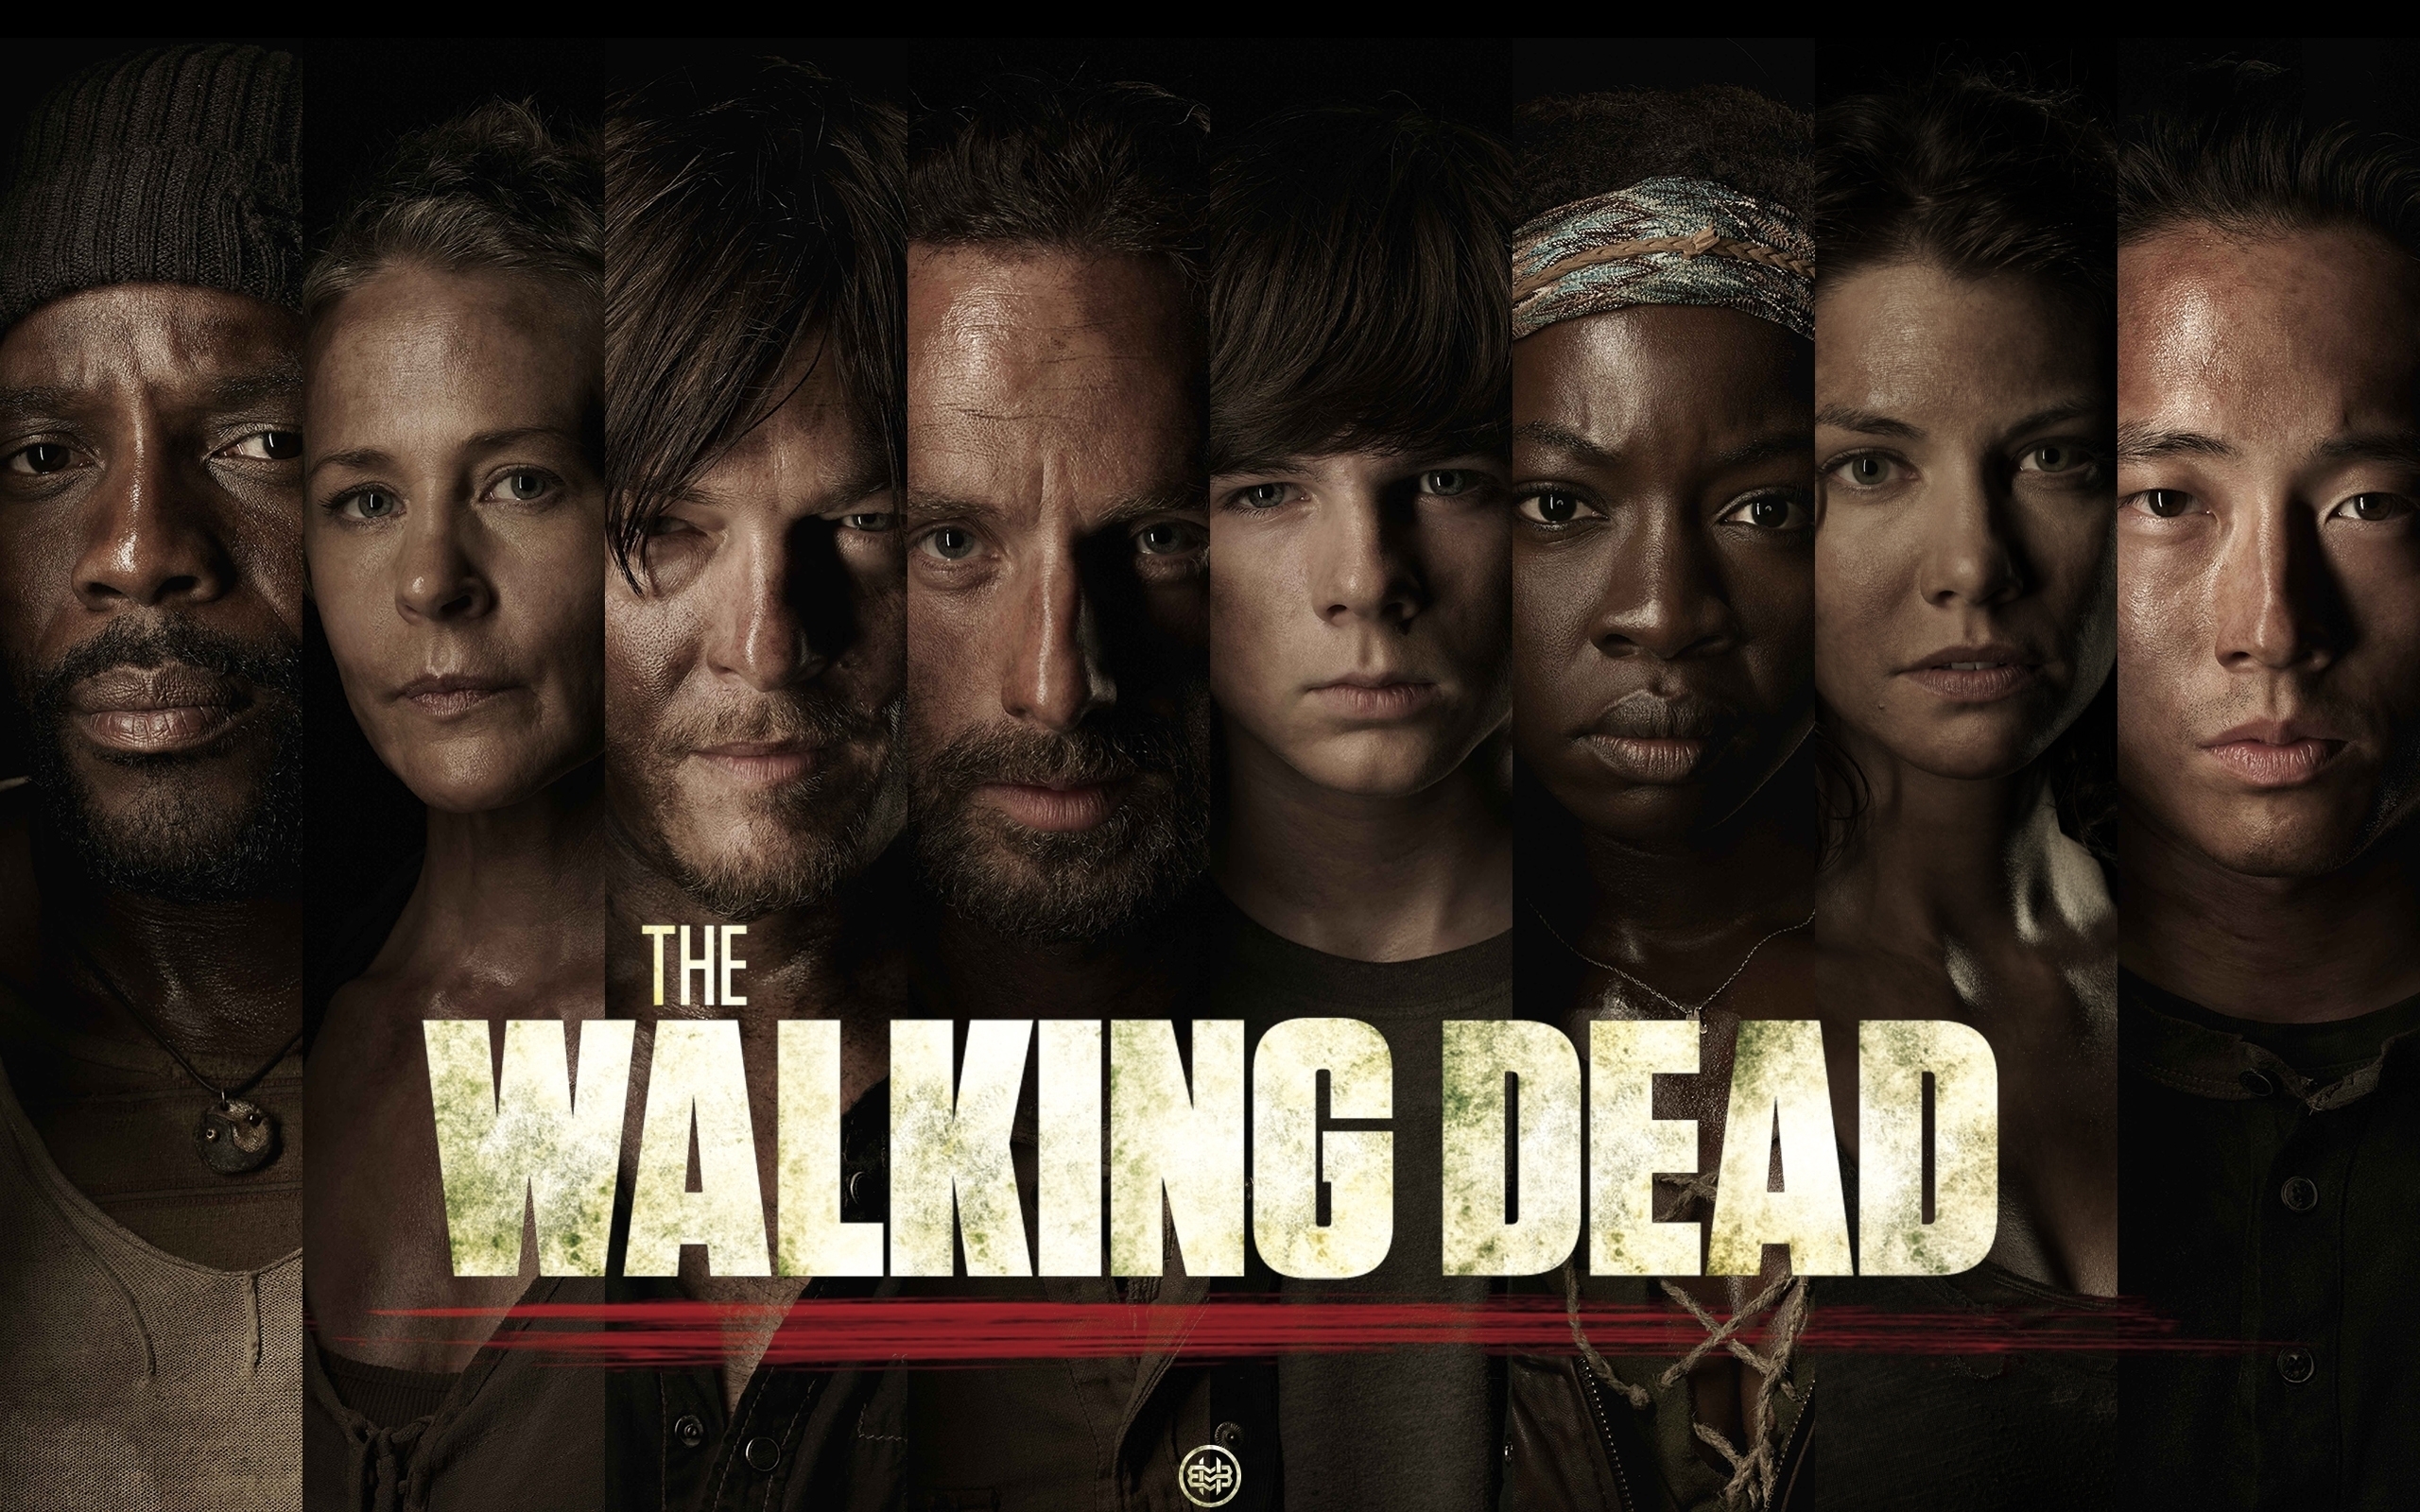 The Walking Dead Characters Poster for 2560 x 1600 widescreen resolution